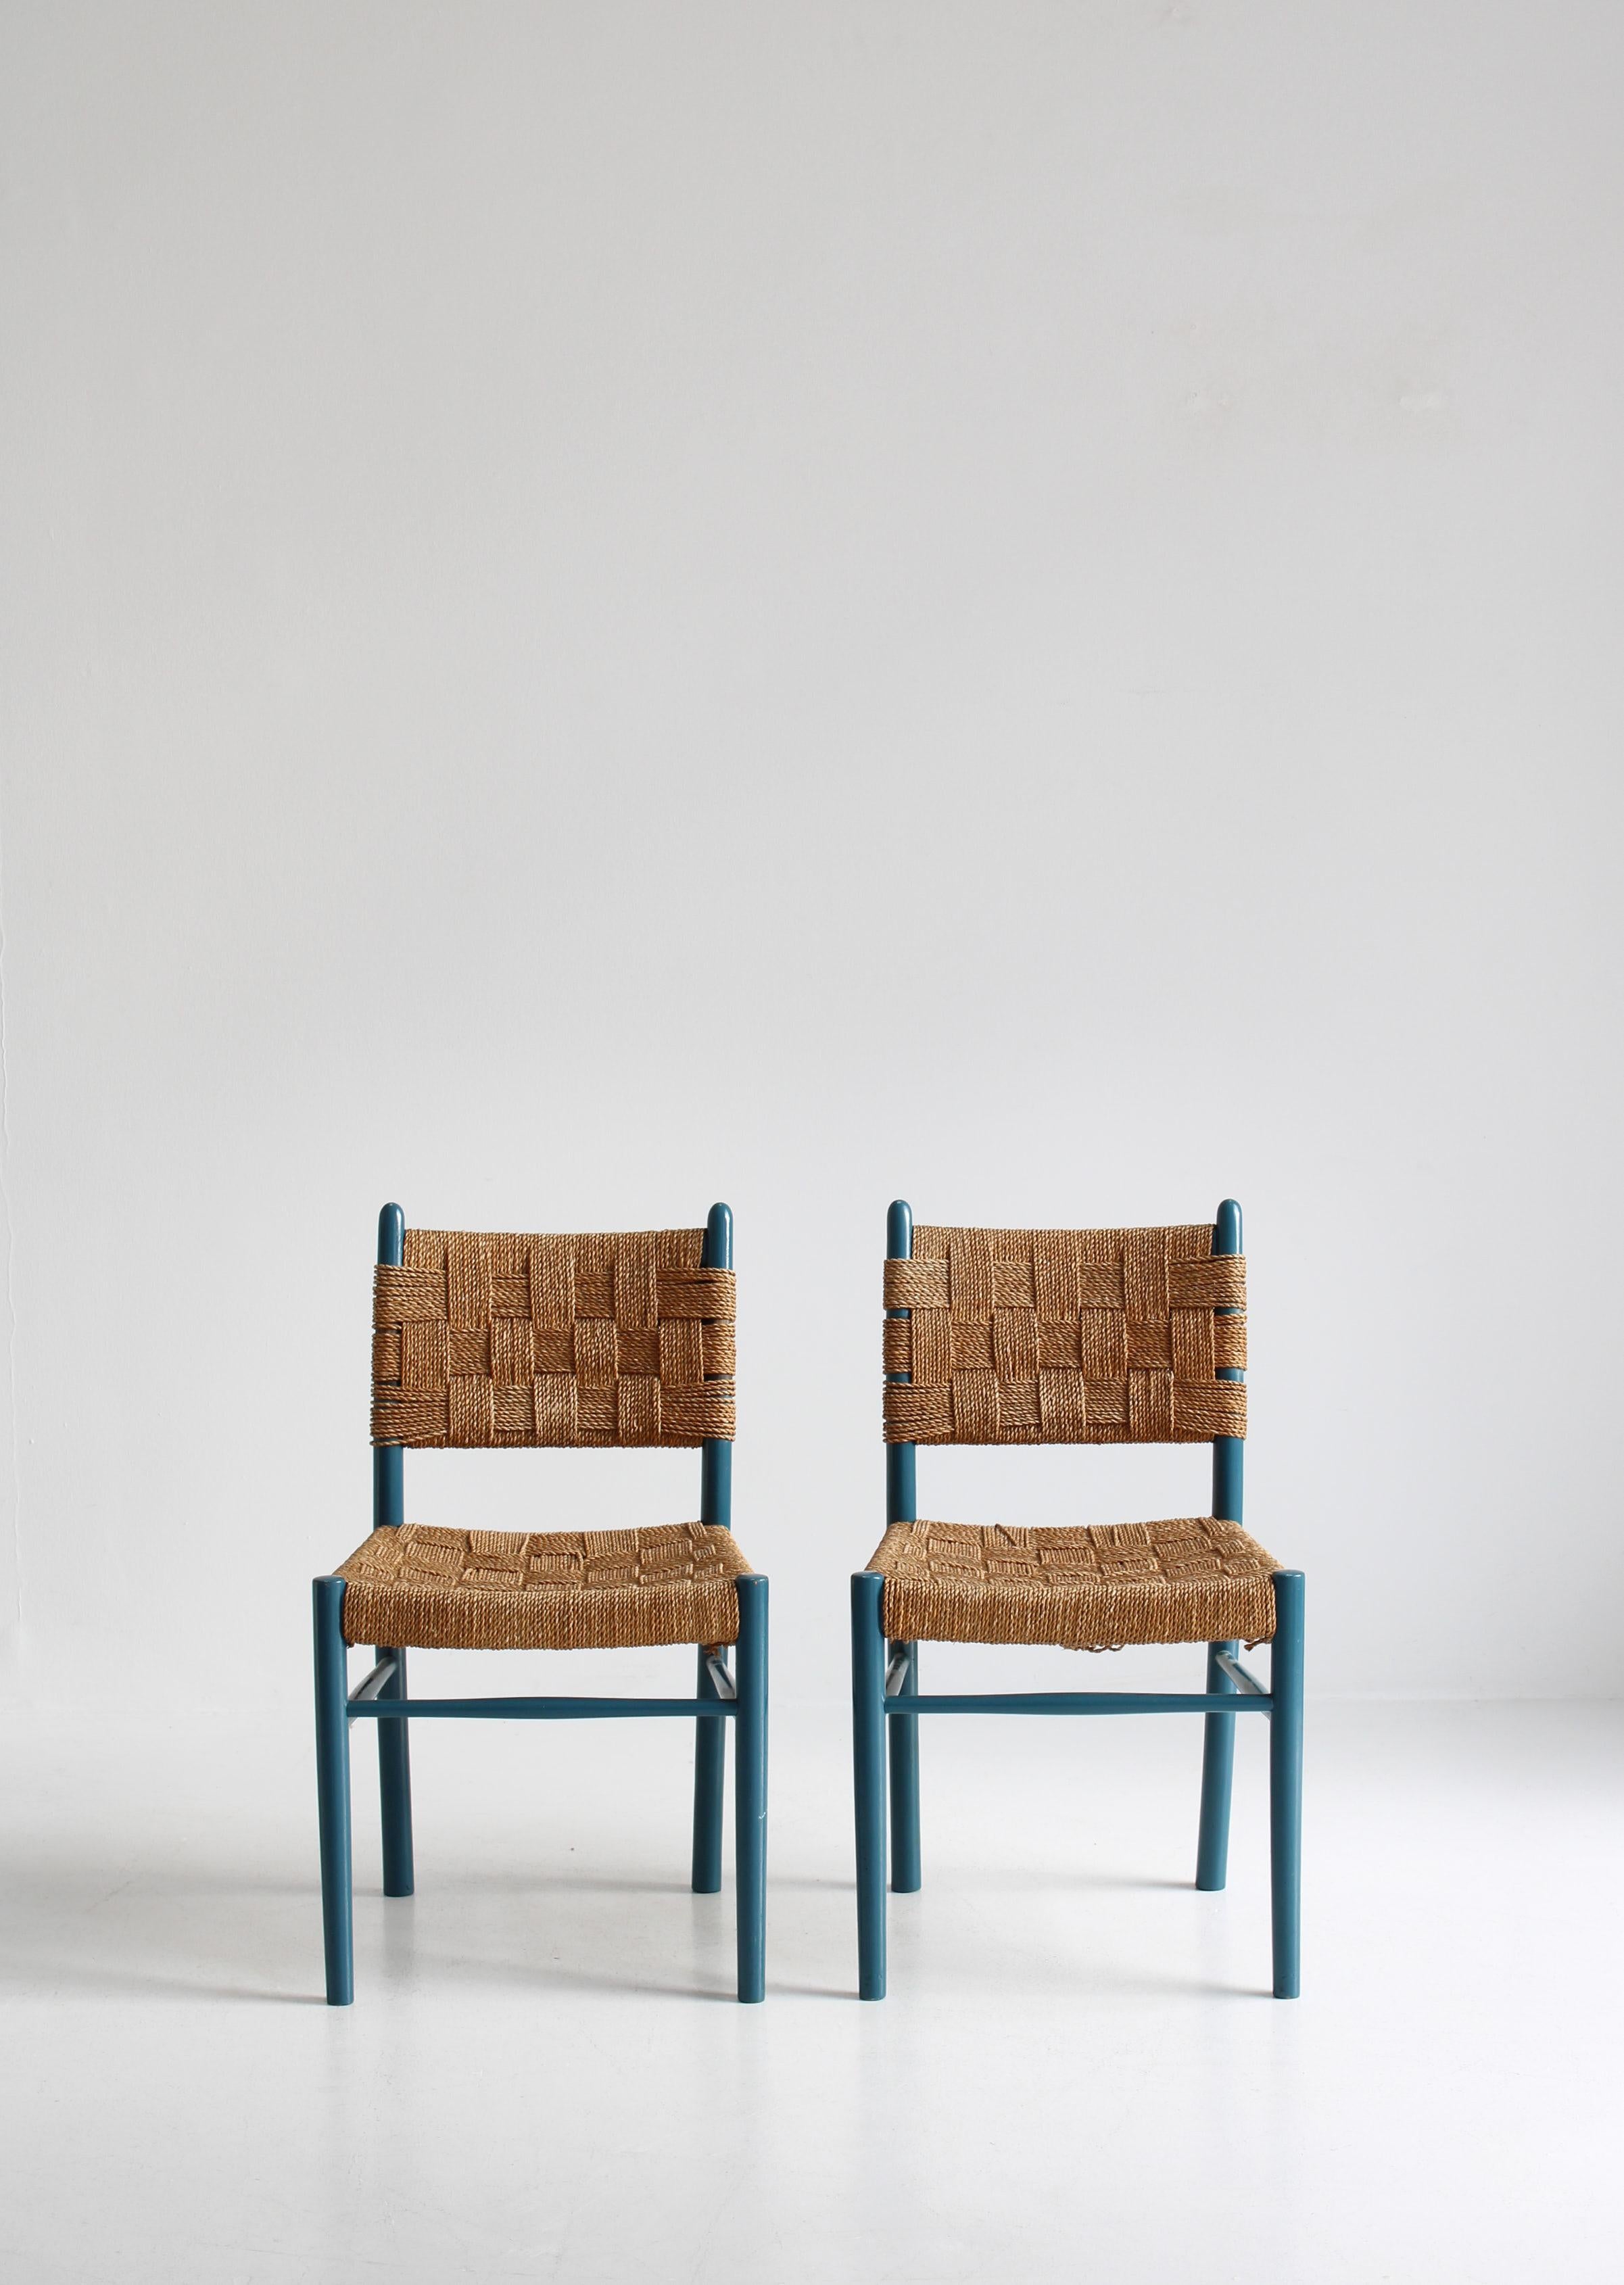 Pair of rare and important chairs by Karl Scrøder made in the 1930s at Fritz Hansen, Denmark. Wonderful example of the early functionalism that dominated Danish furniture design in the beginning of the Danish modern era. Karl Schröder was working